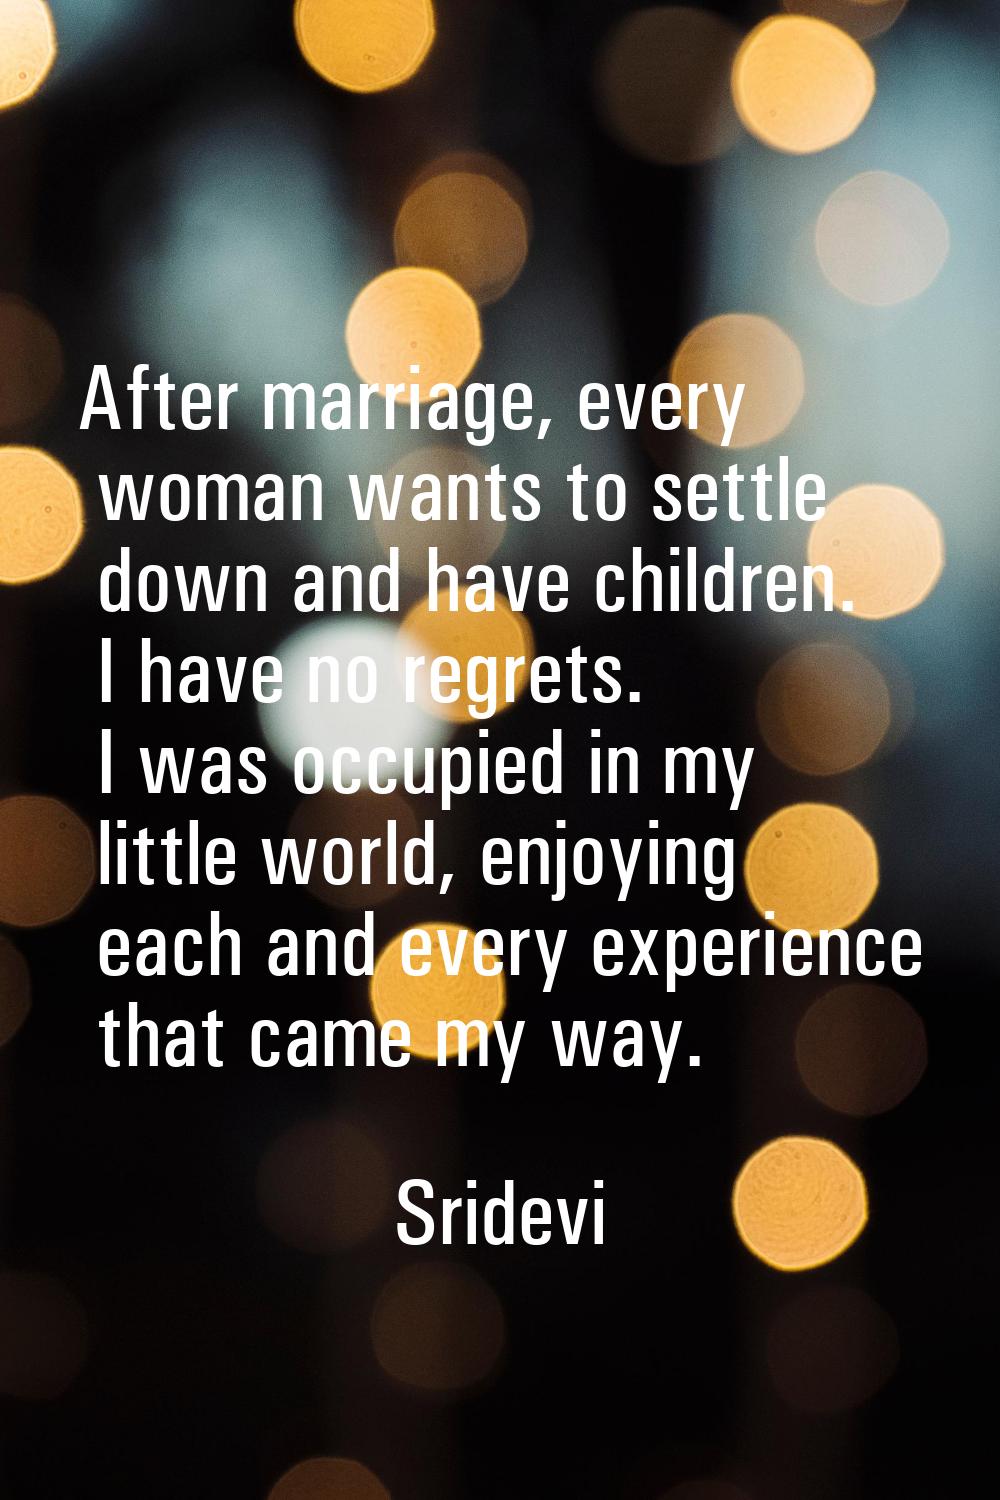 After marriage, every woman wants to settle down and have children. I have no regrets. I was occupi